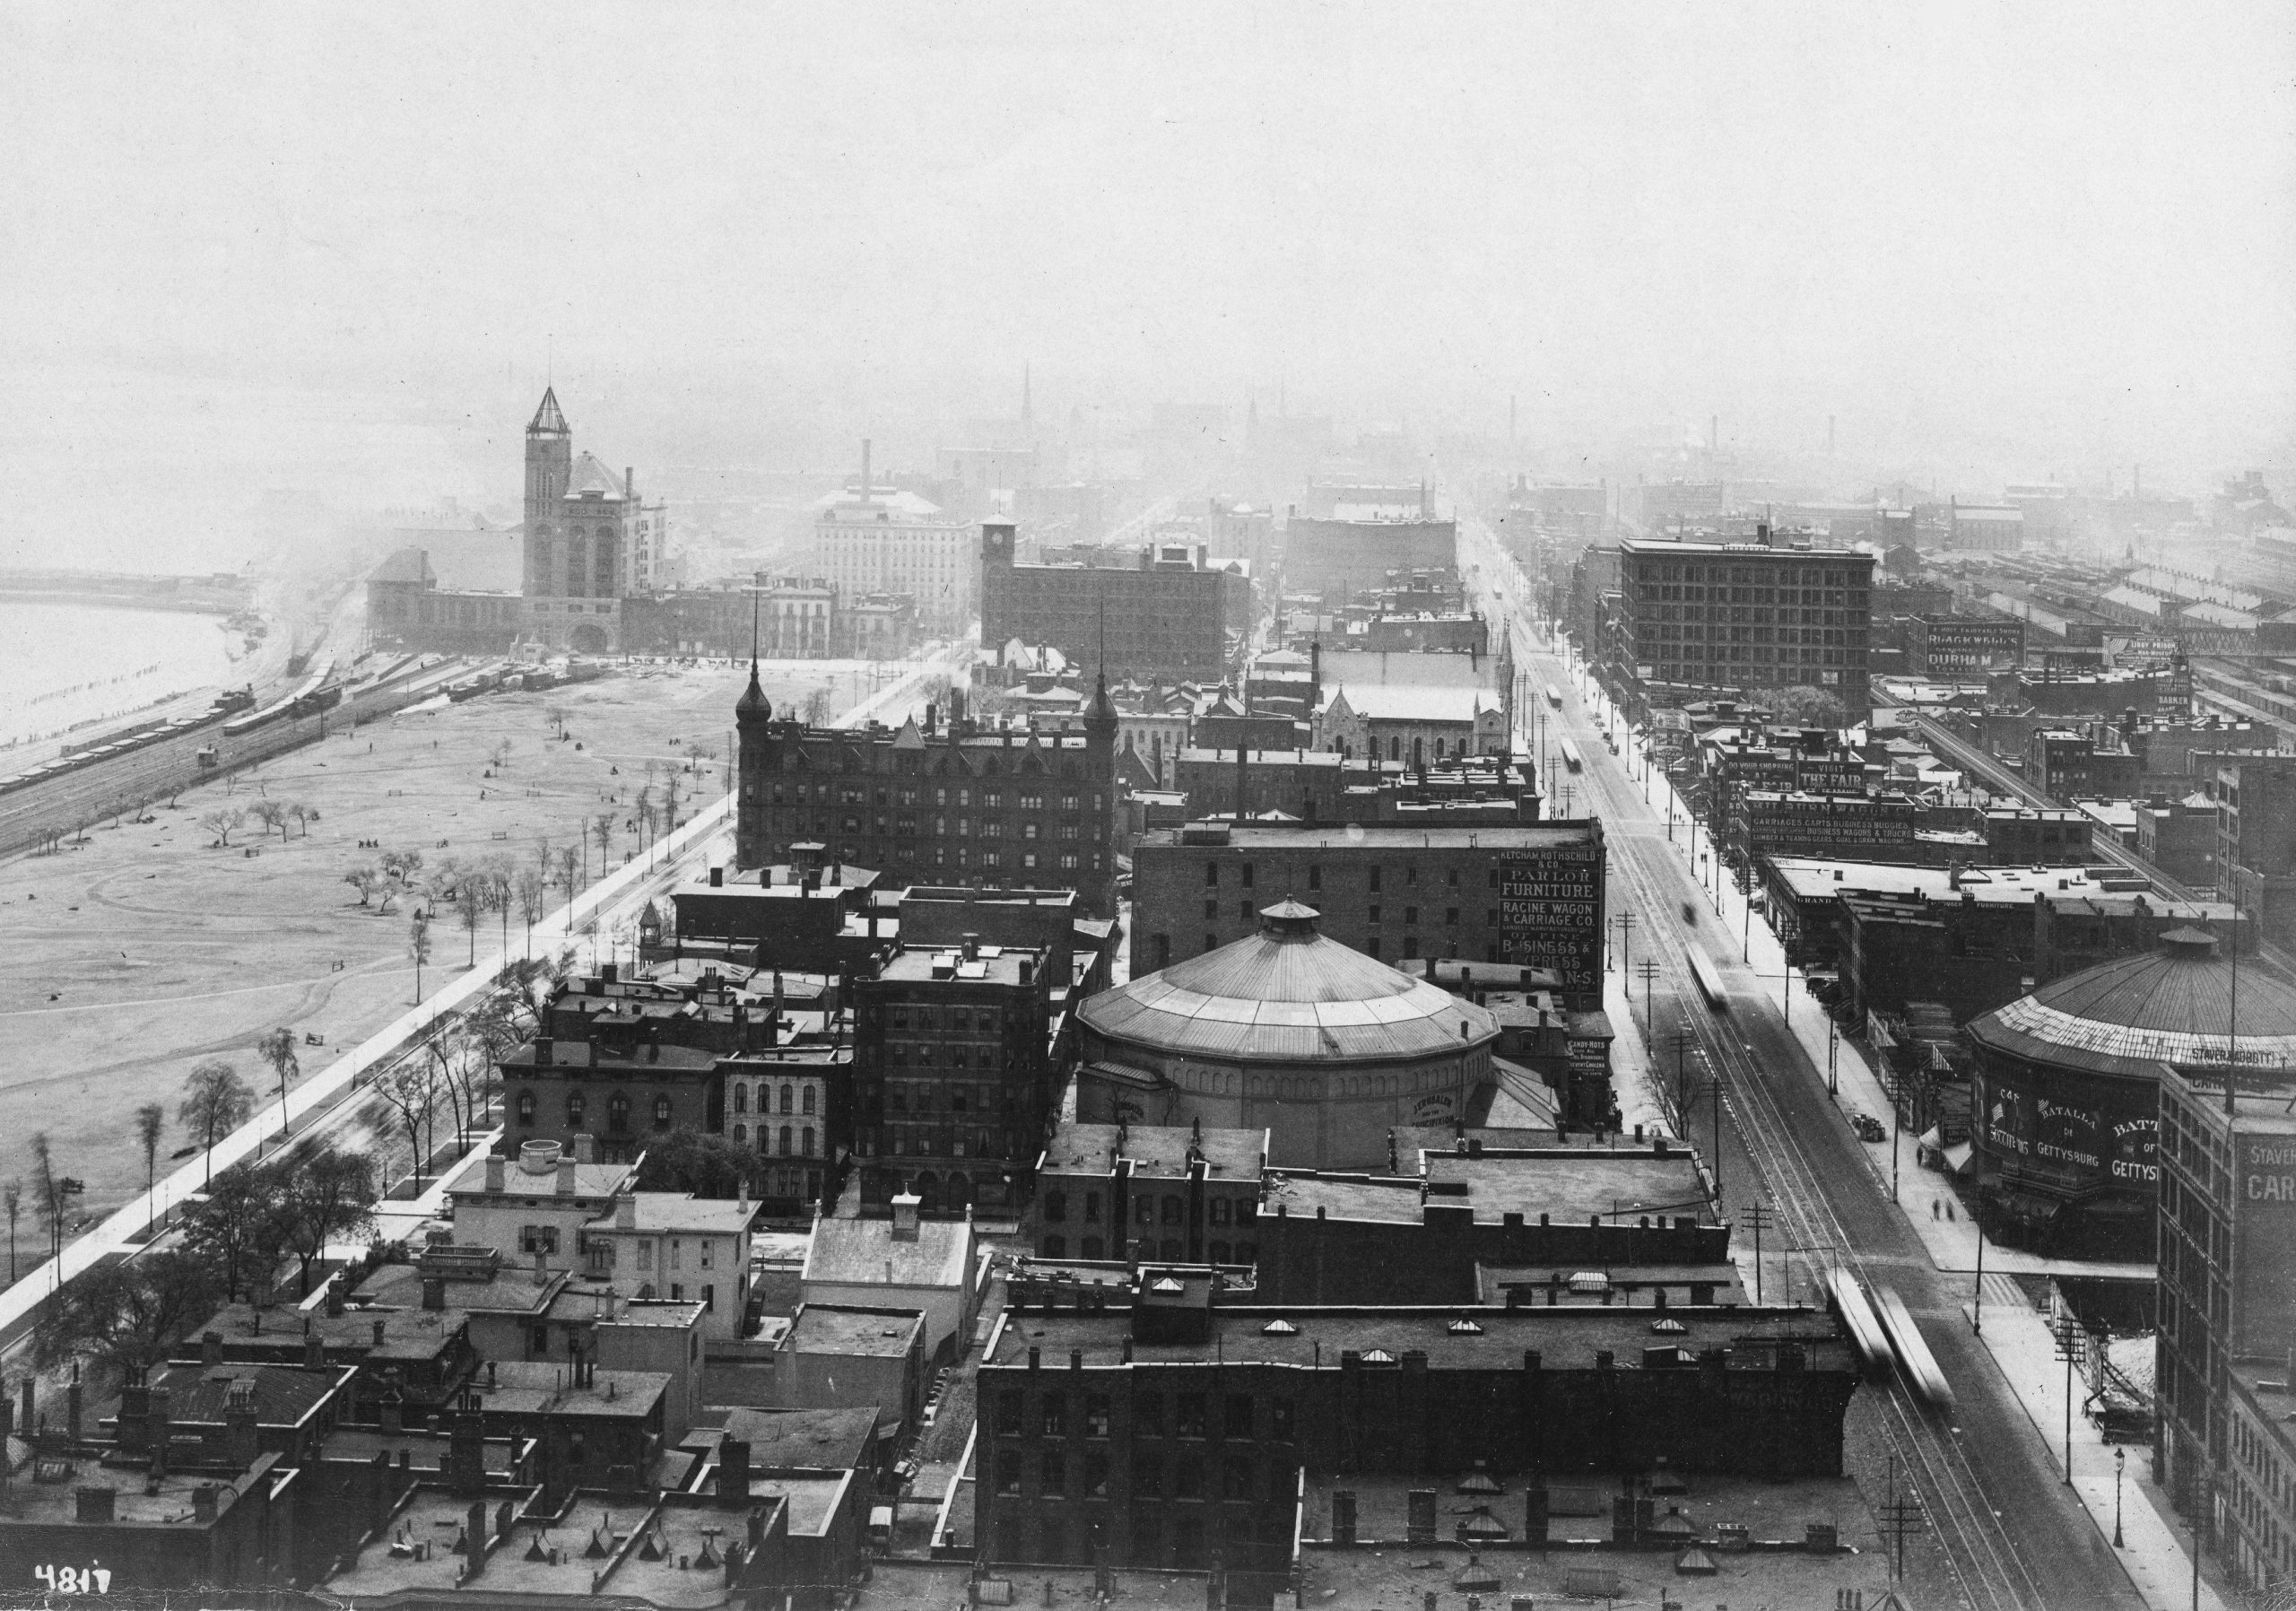 Aerial view of Chicago looking south down Michigan avenue two circular cyclorama buildings can be seen in foreground